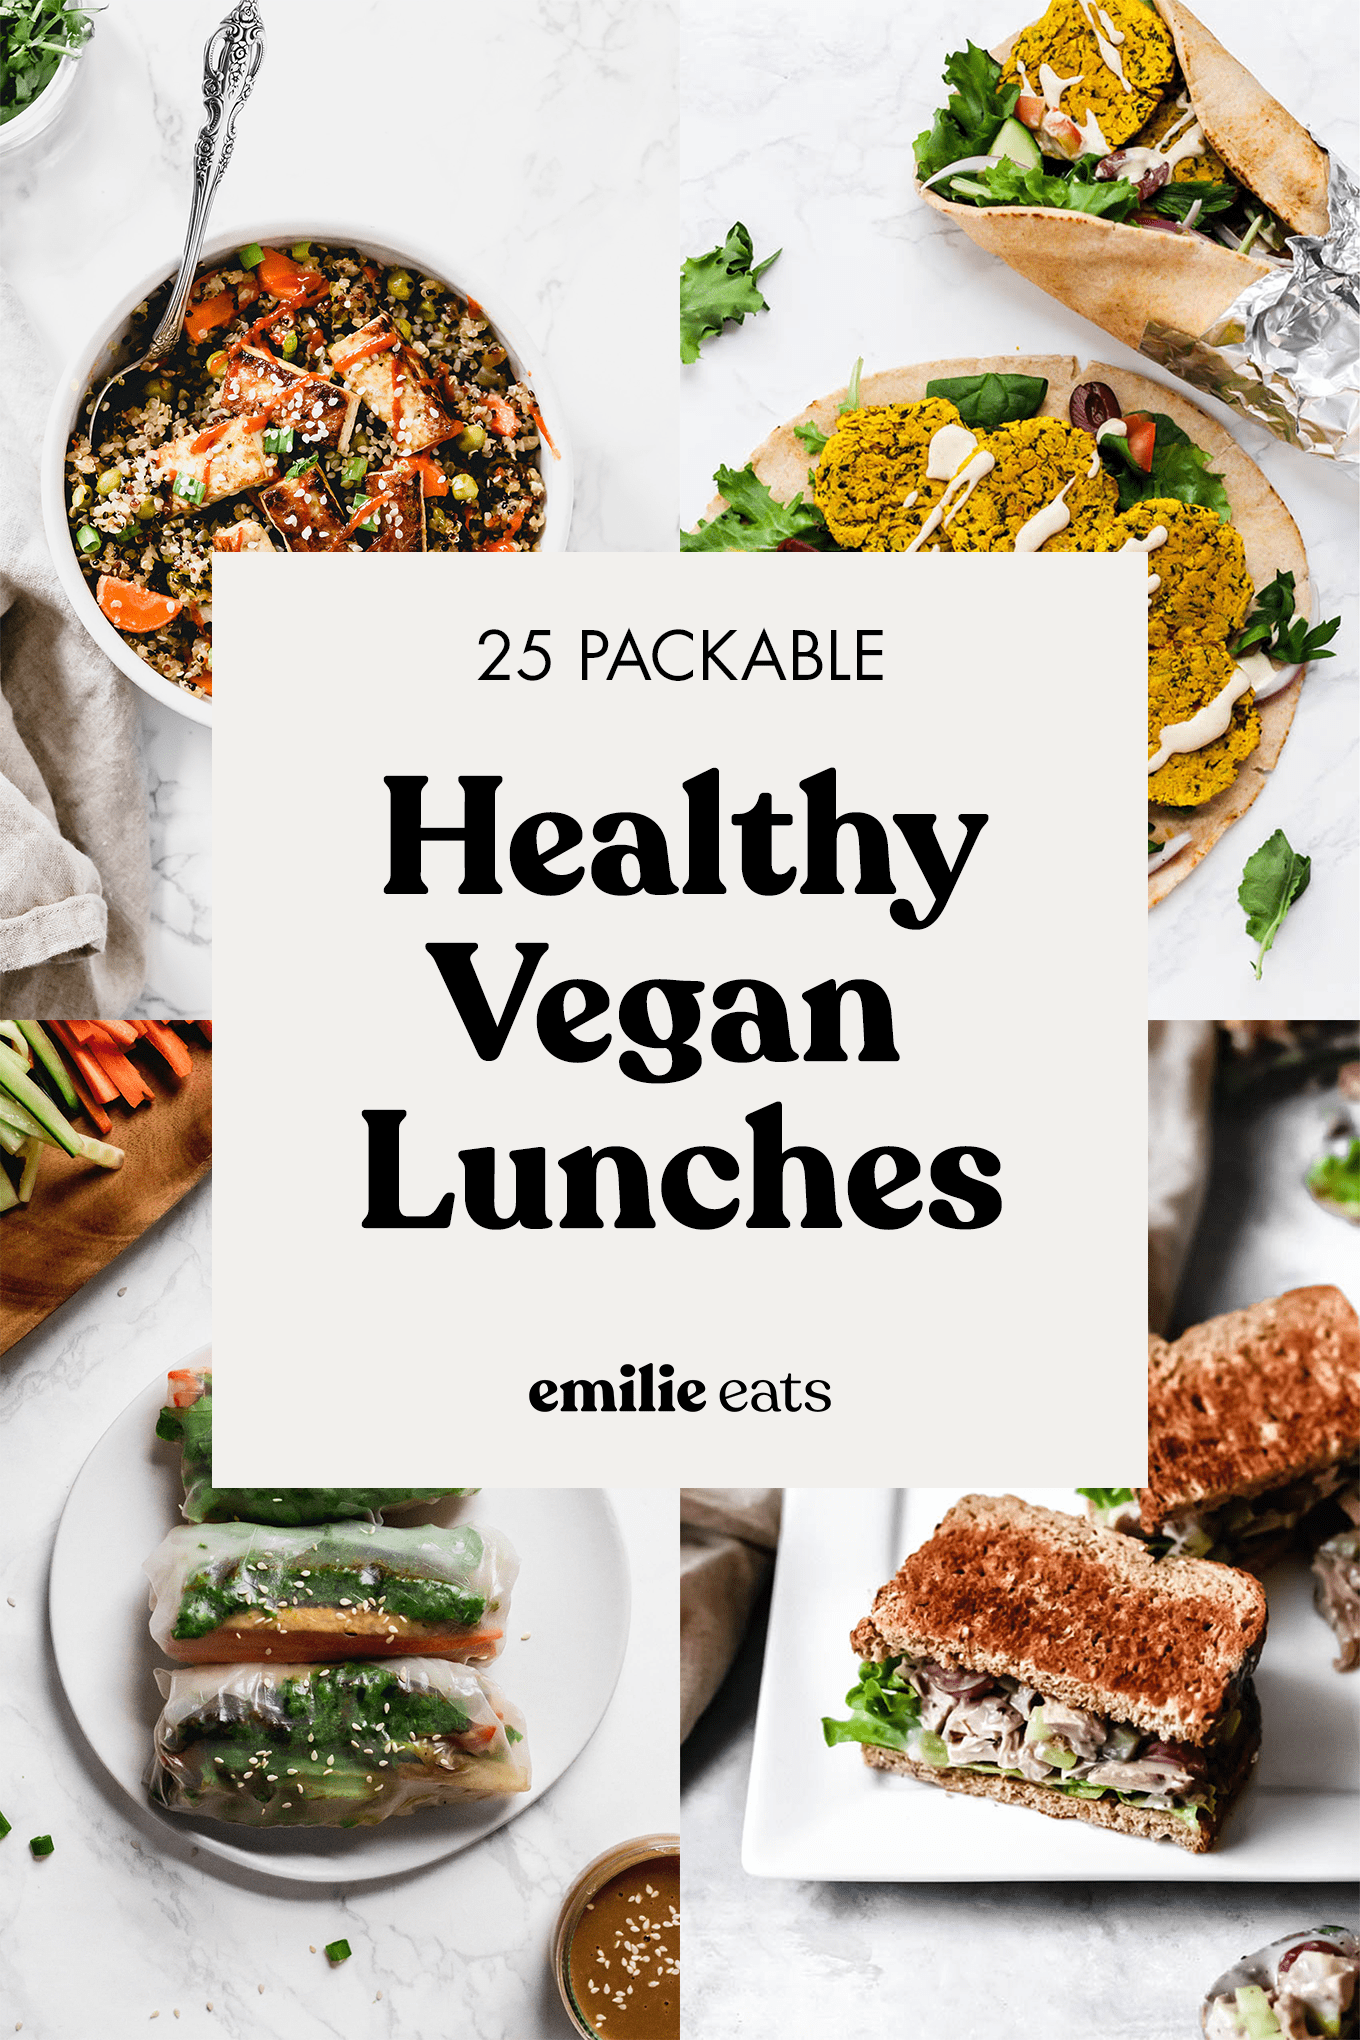 The Ultimate Guide to Packing a Vegan Lunch Box ~ Veggie Inspired